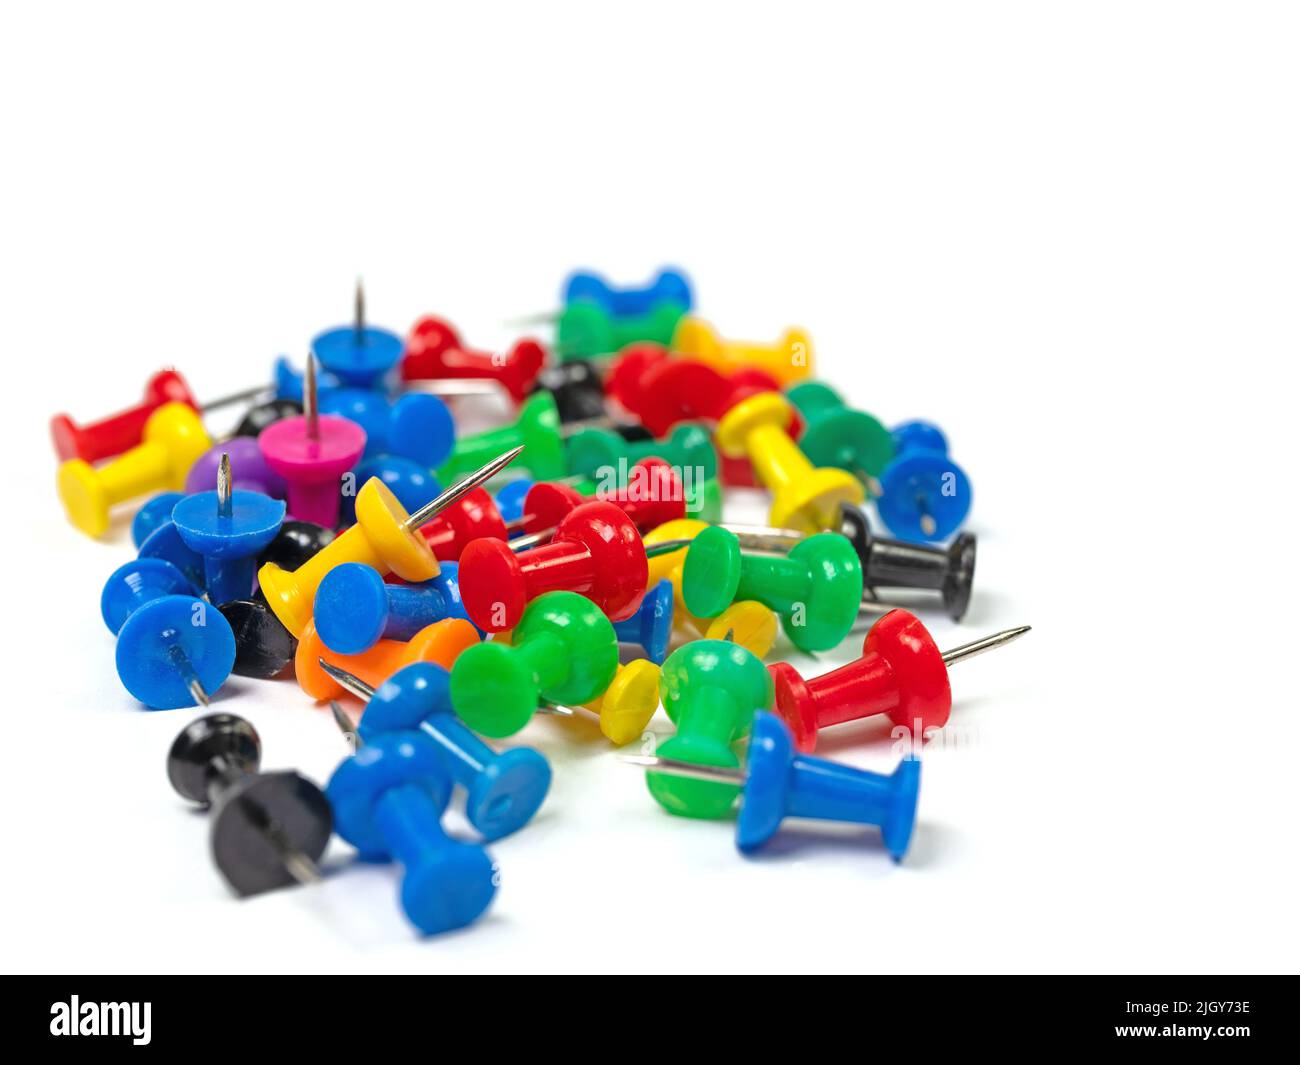 Colorful pushpins against a white background Stock Photo